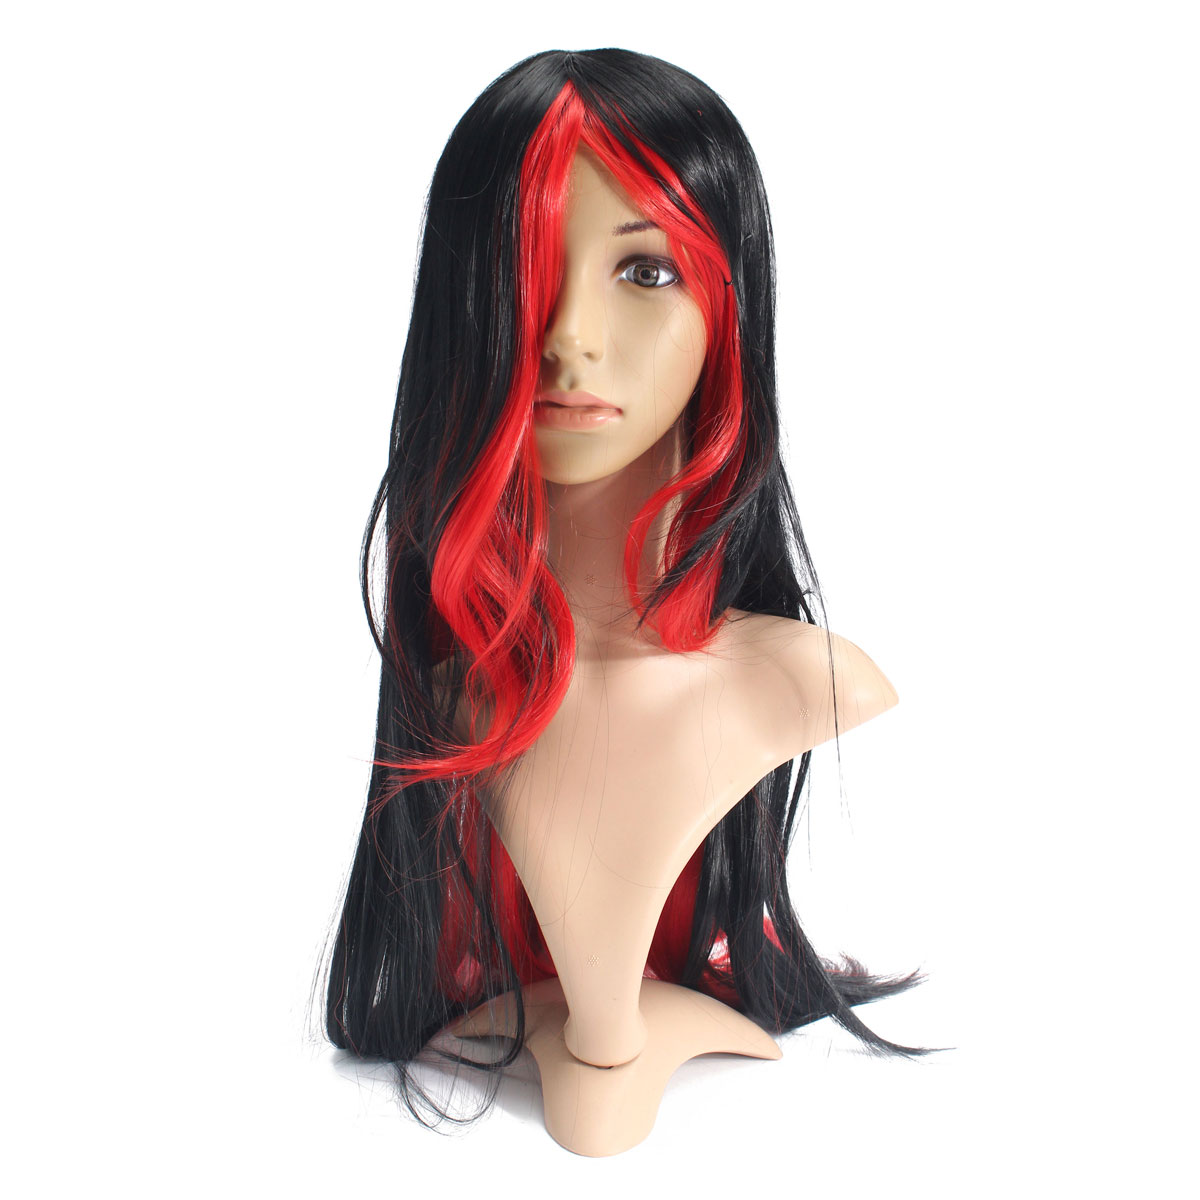 70cm-Black-Red-Mixed-Color-Long-Straight-Wavy-Bangs-Women-Cosplay-Wigs-Side-Bang-1062098